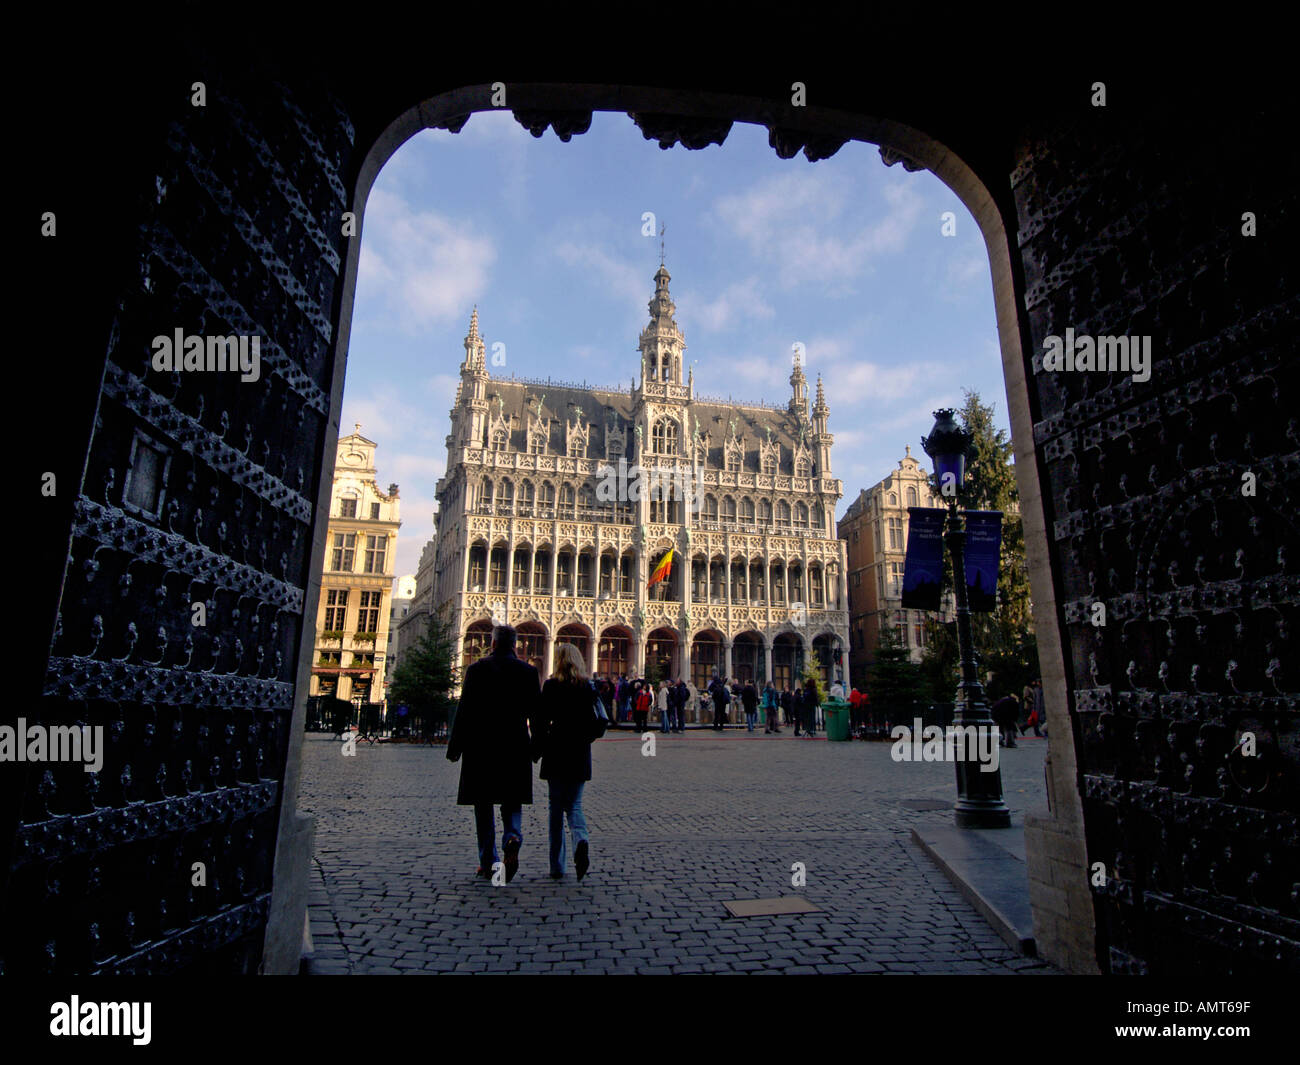 The Musee de la Ville museum on the Grand Place main square in Brussels Belgium Stock Photo